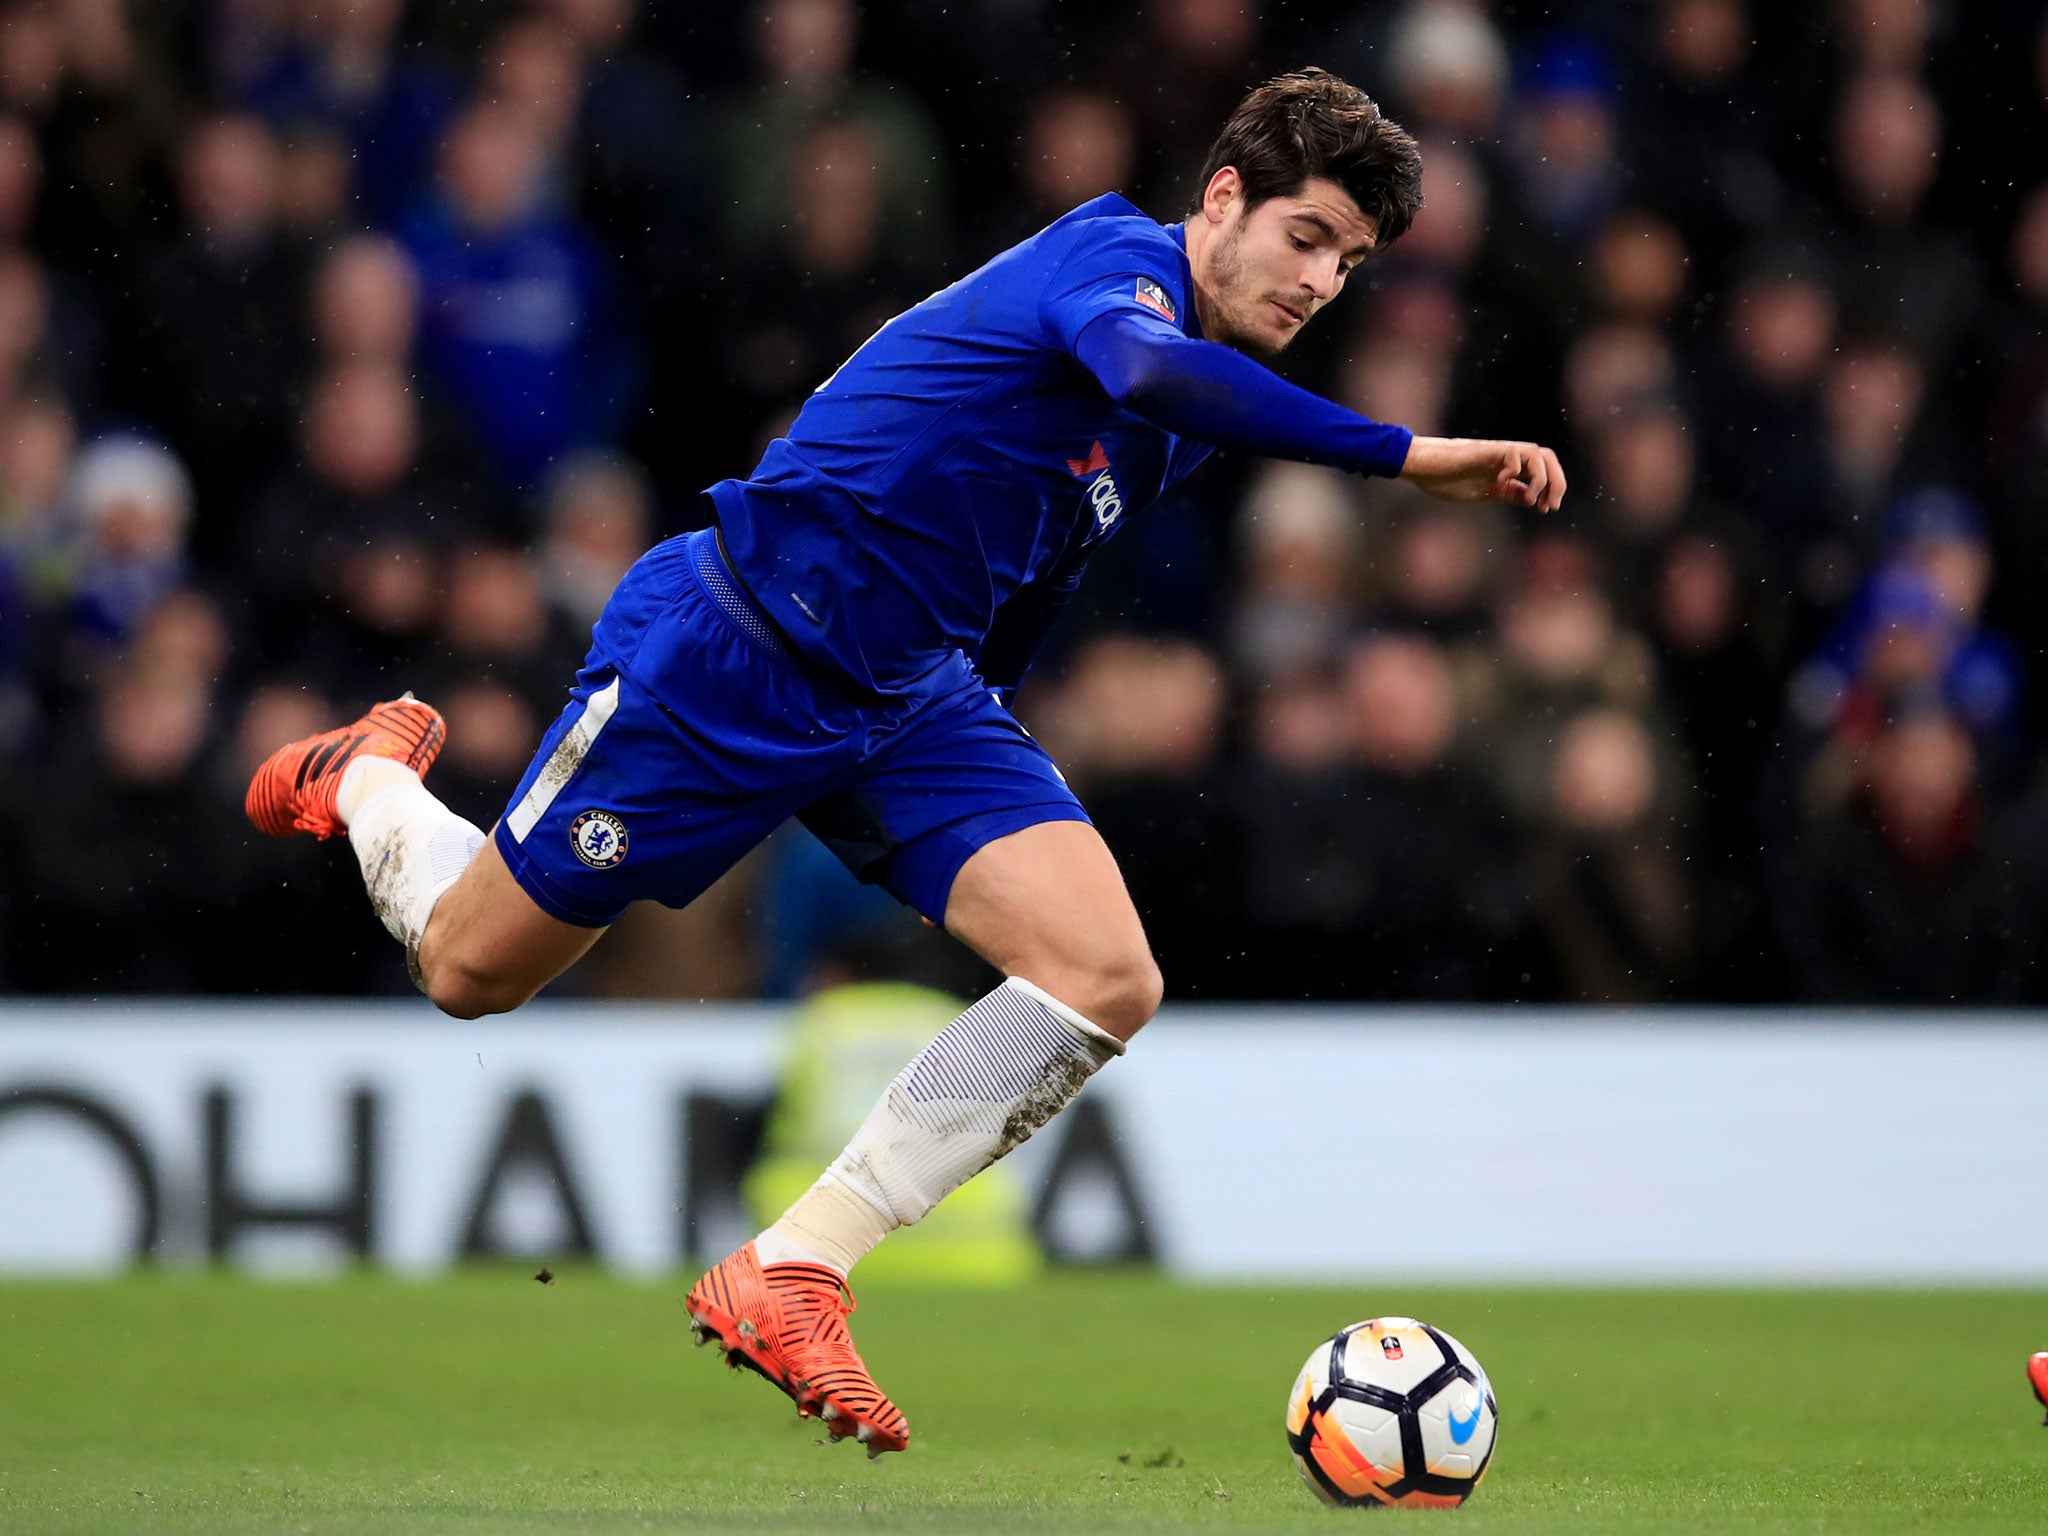 Morata has struggled to make an impact in the second half of the season